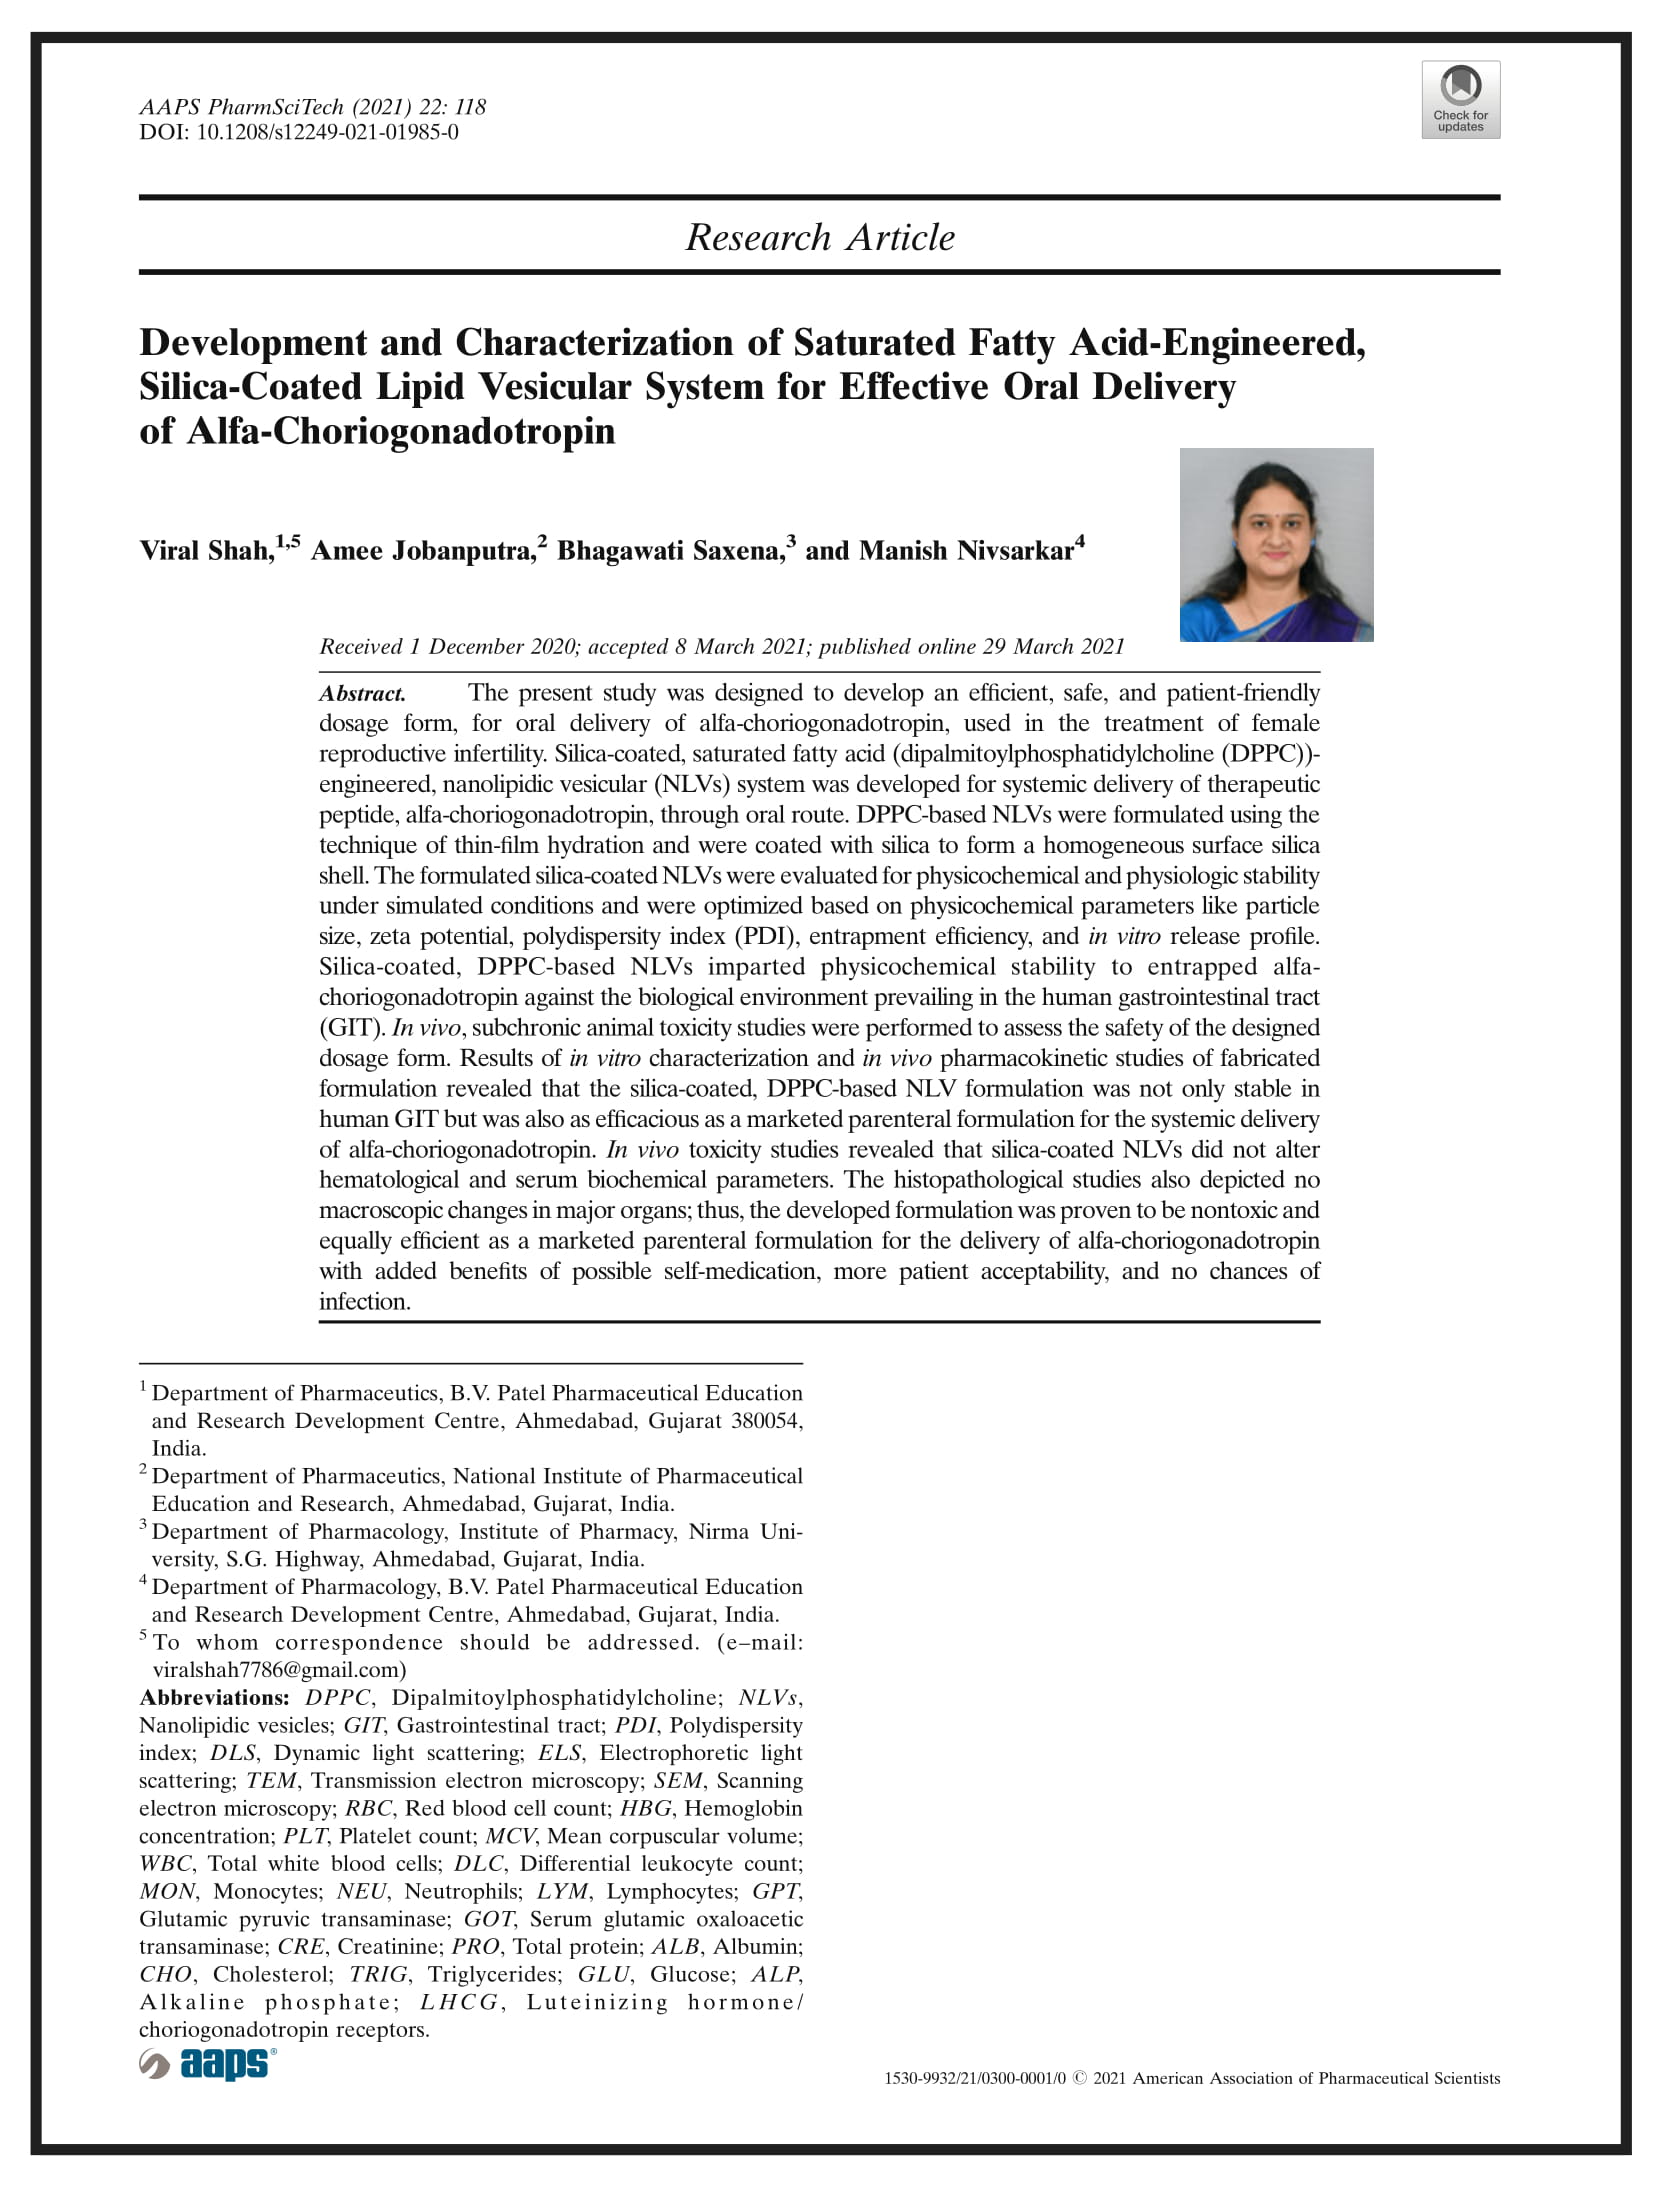 Development and Characterization of Saturated Fatty Acid-Engineered, Silica-Coated Lipid Vesicular System for Effective Oral Delivery of Alfa-Choriogonadotropin